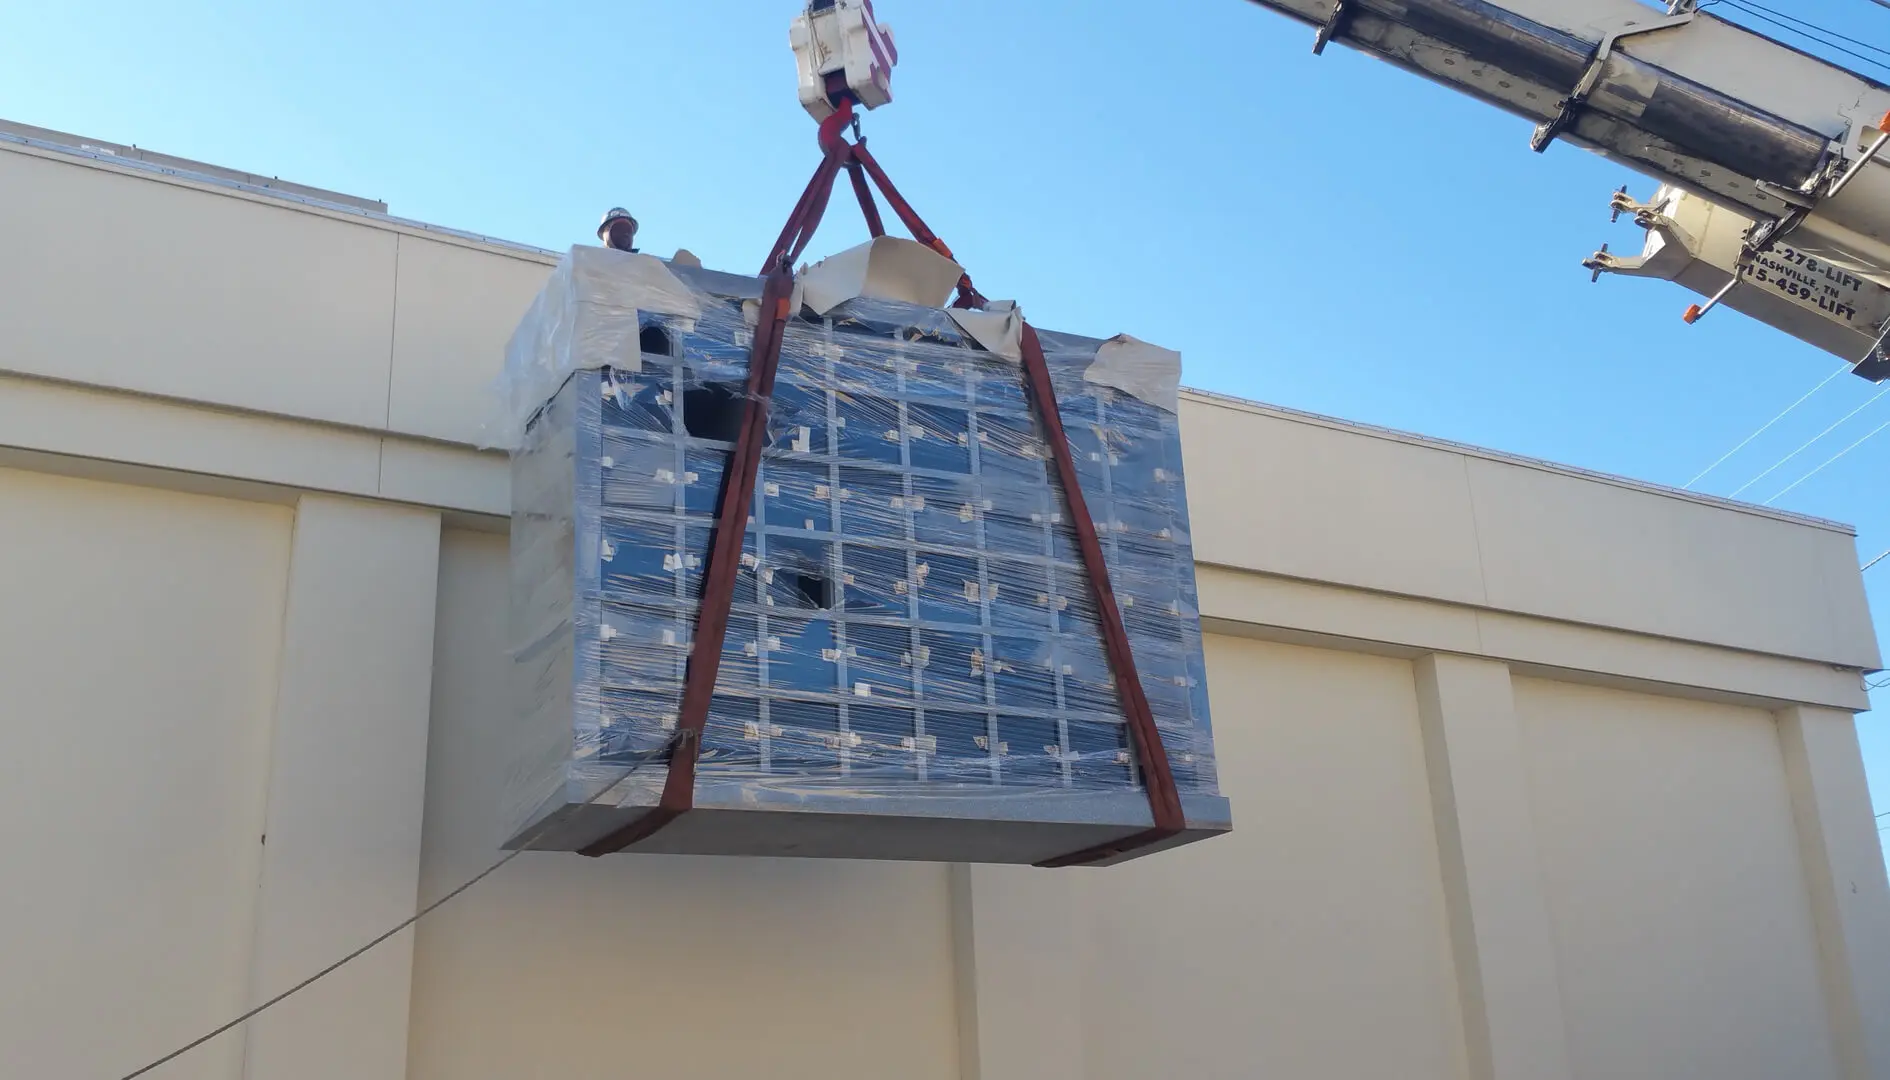 A Crane Carrying a Marble Block in Air With Strings